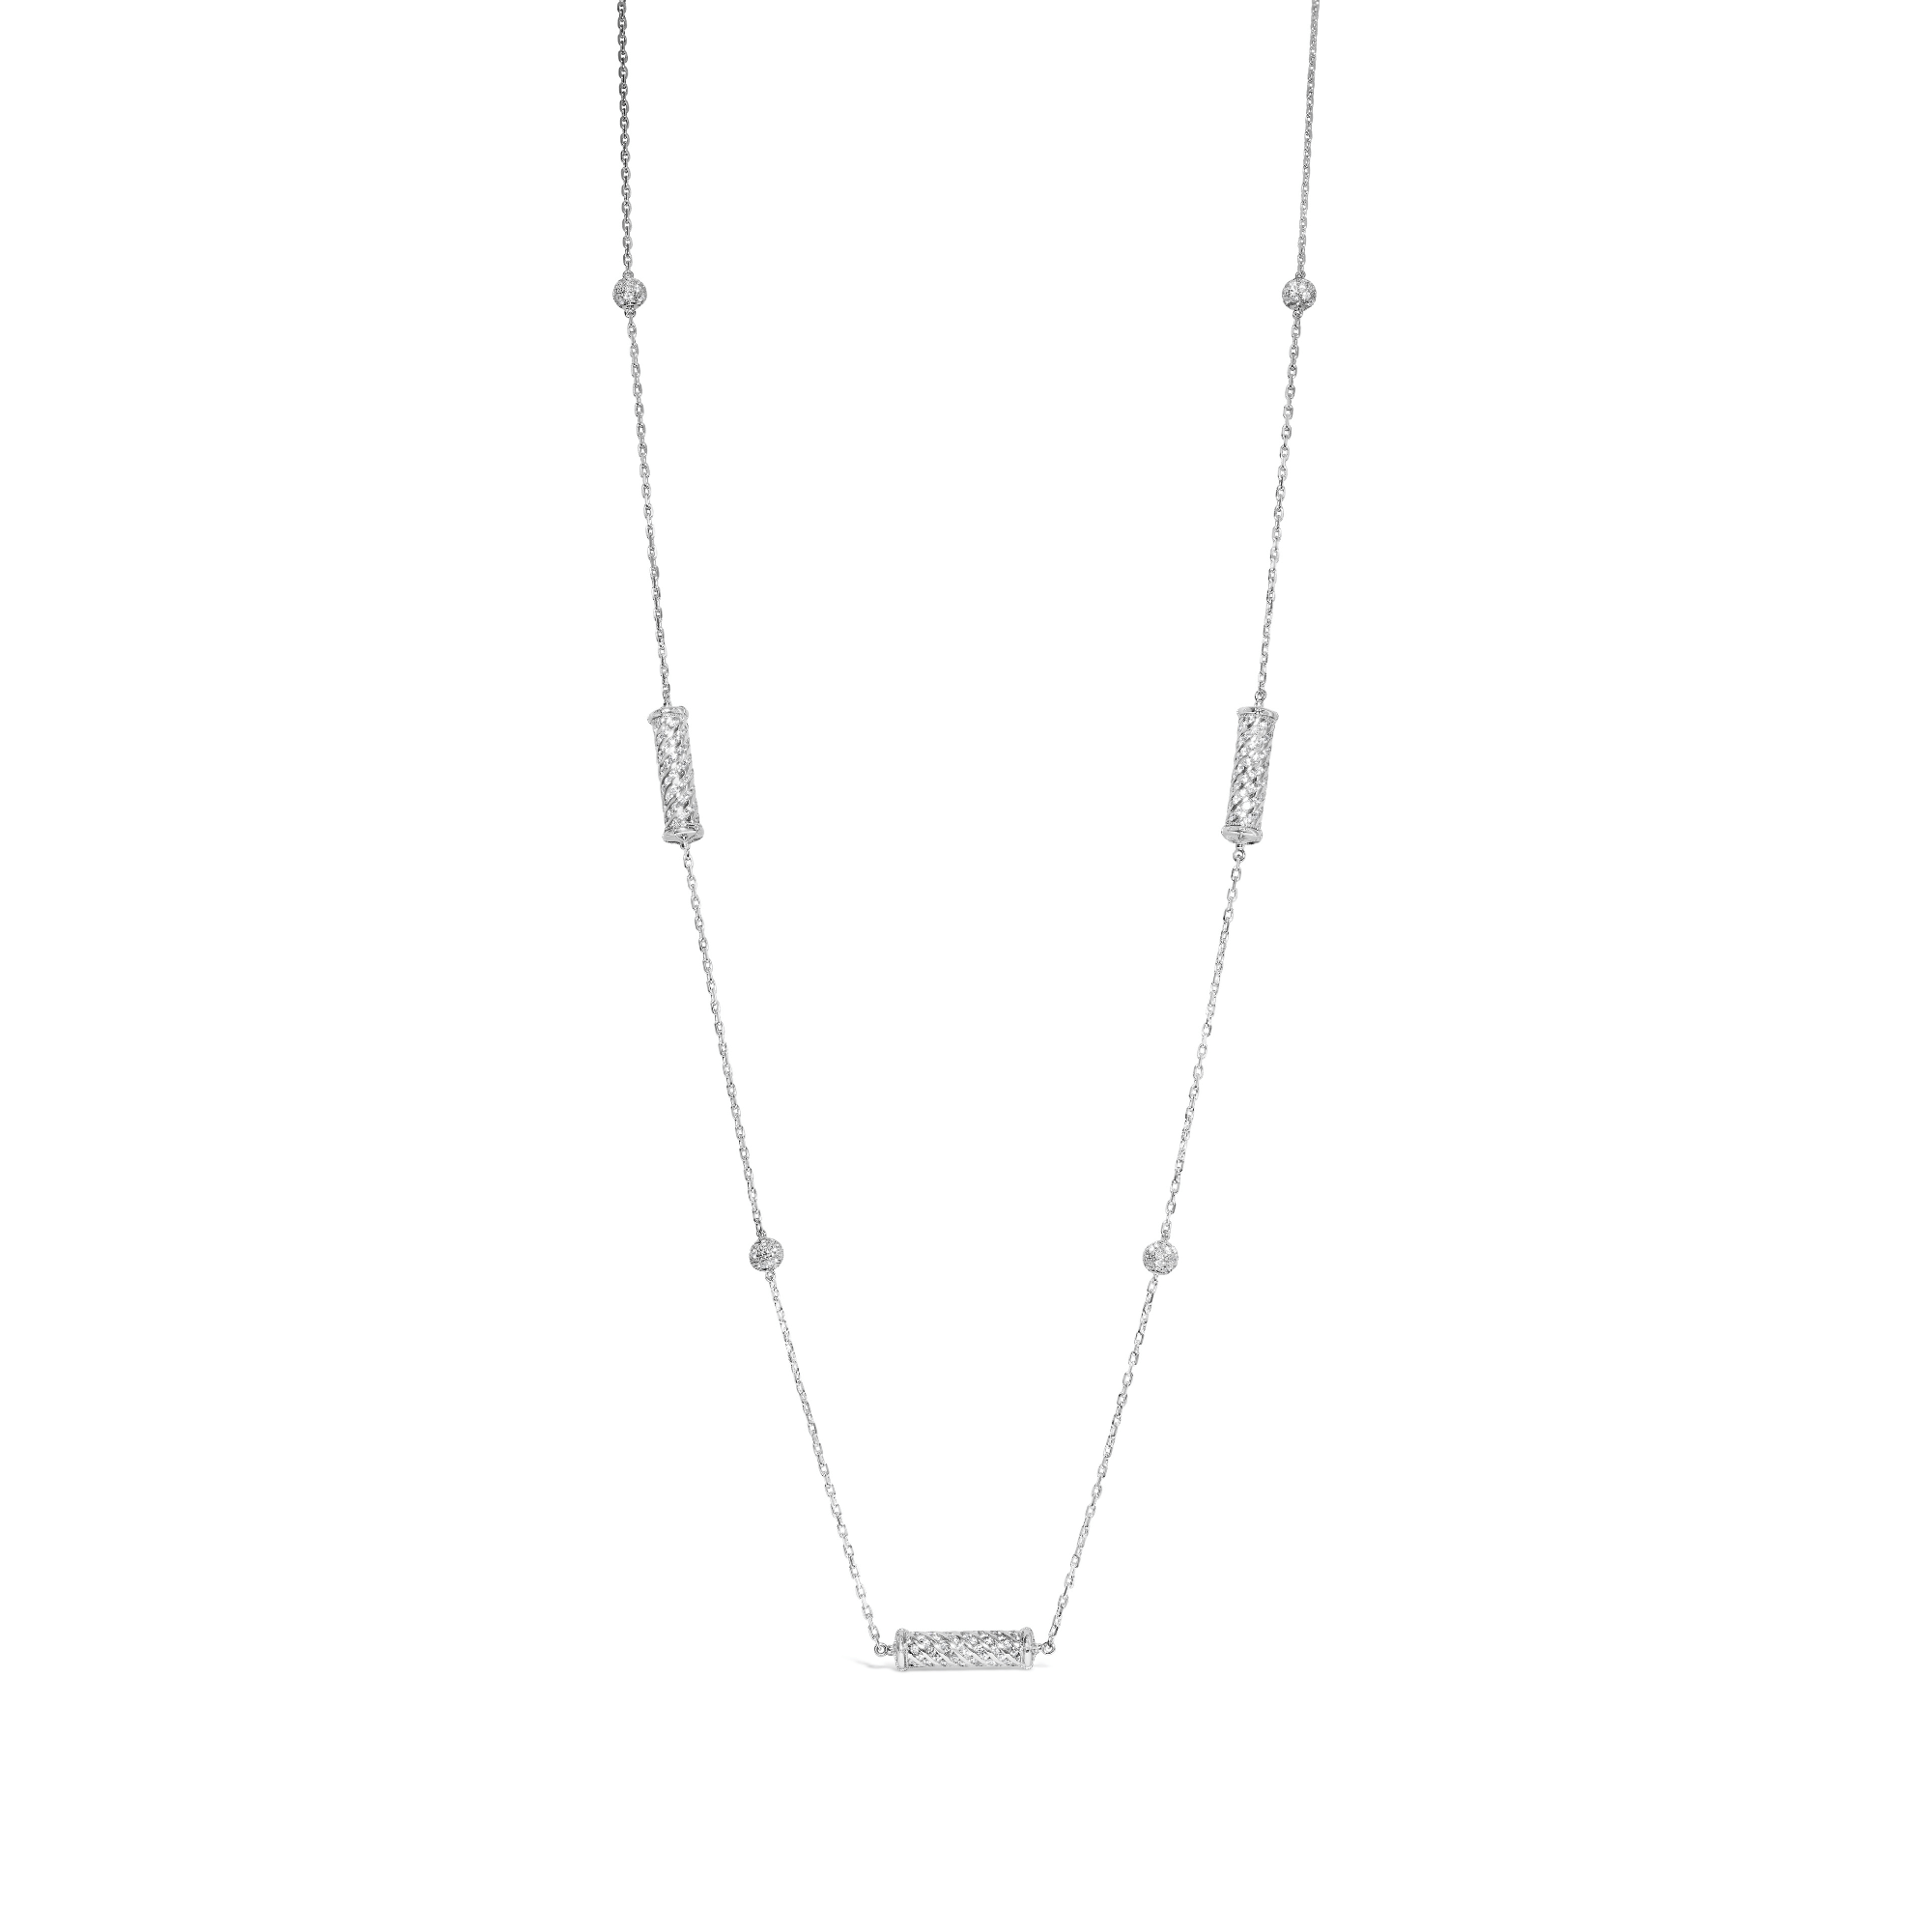 Pirouette collection diamond and white gold long necklace